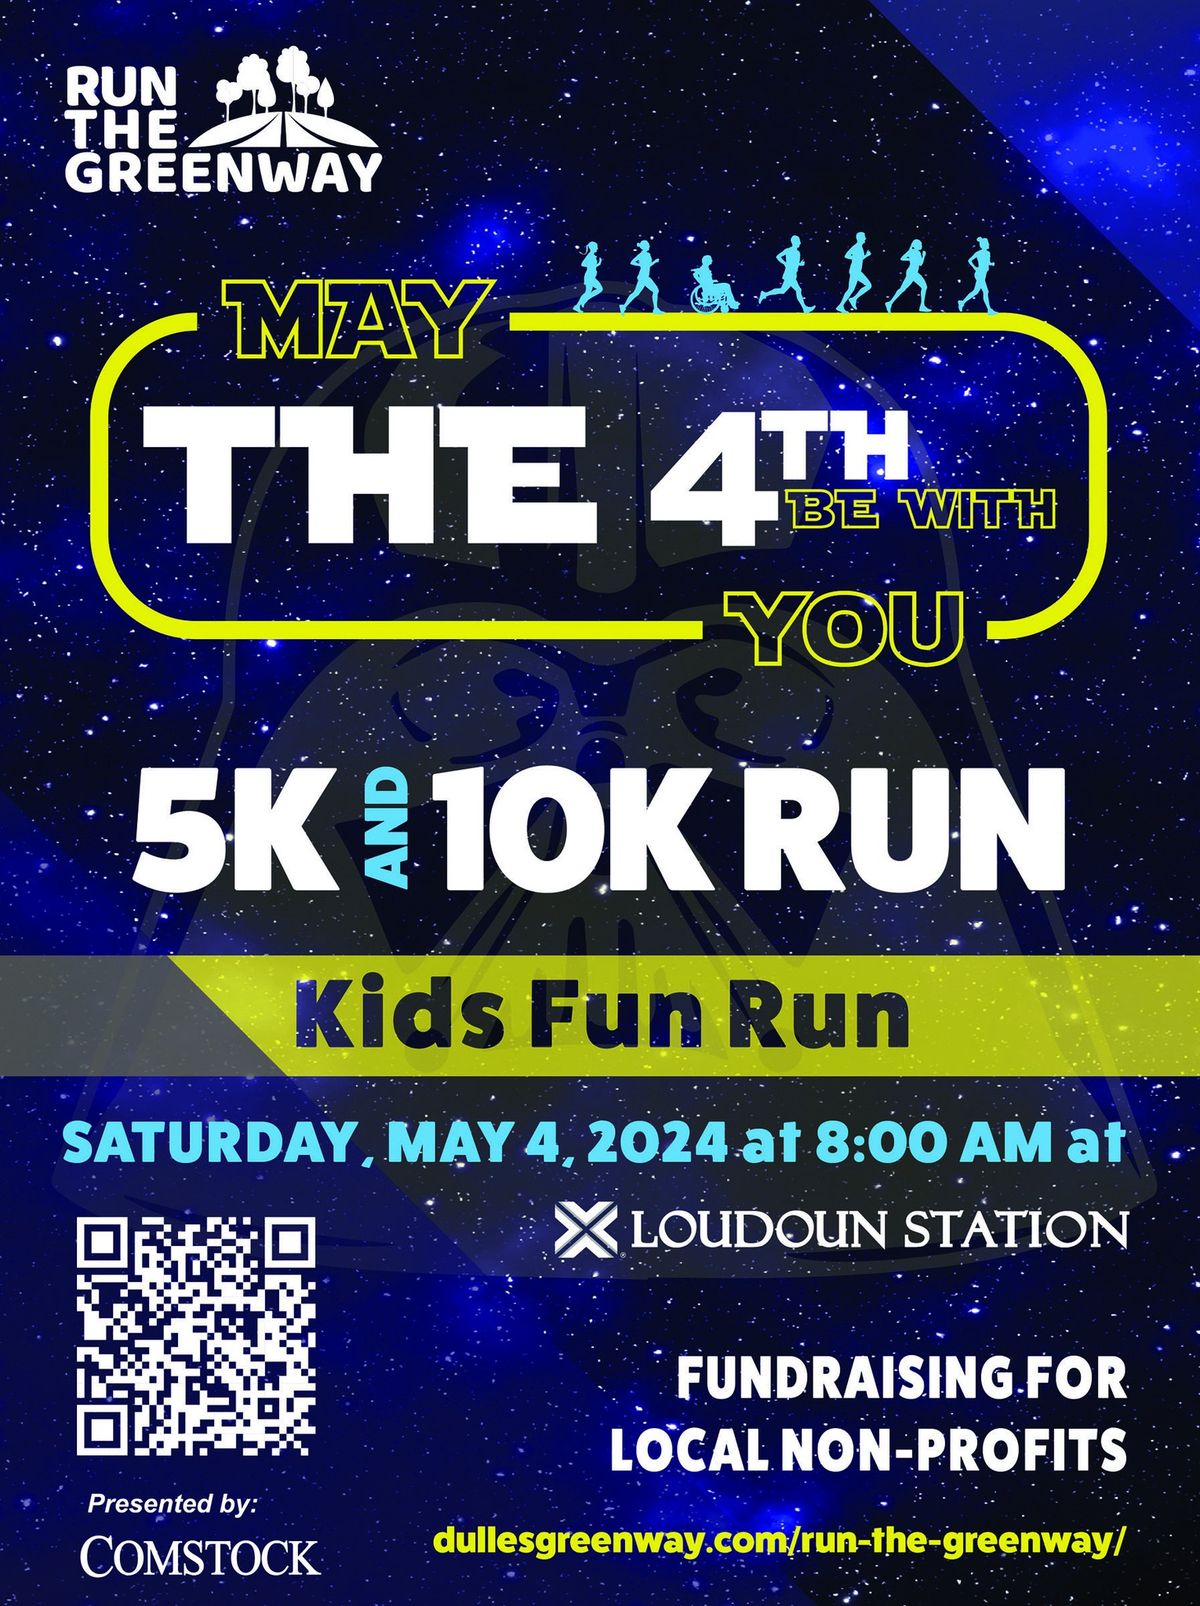 Run The Greenway - May The 4th Be With You